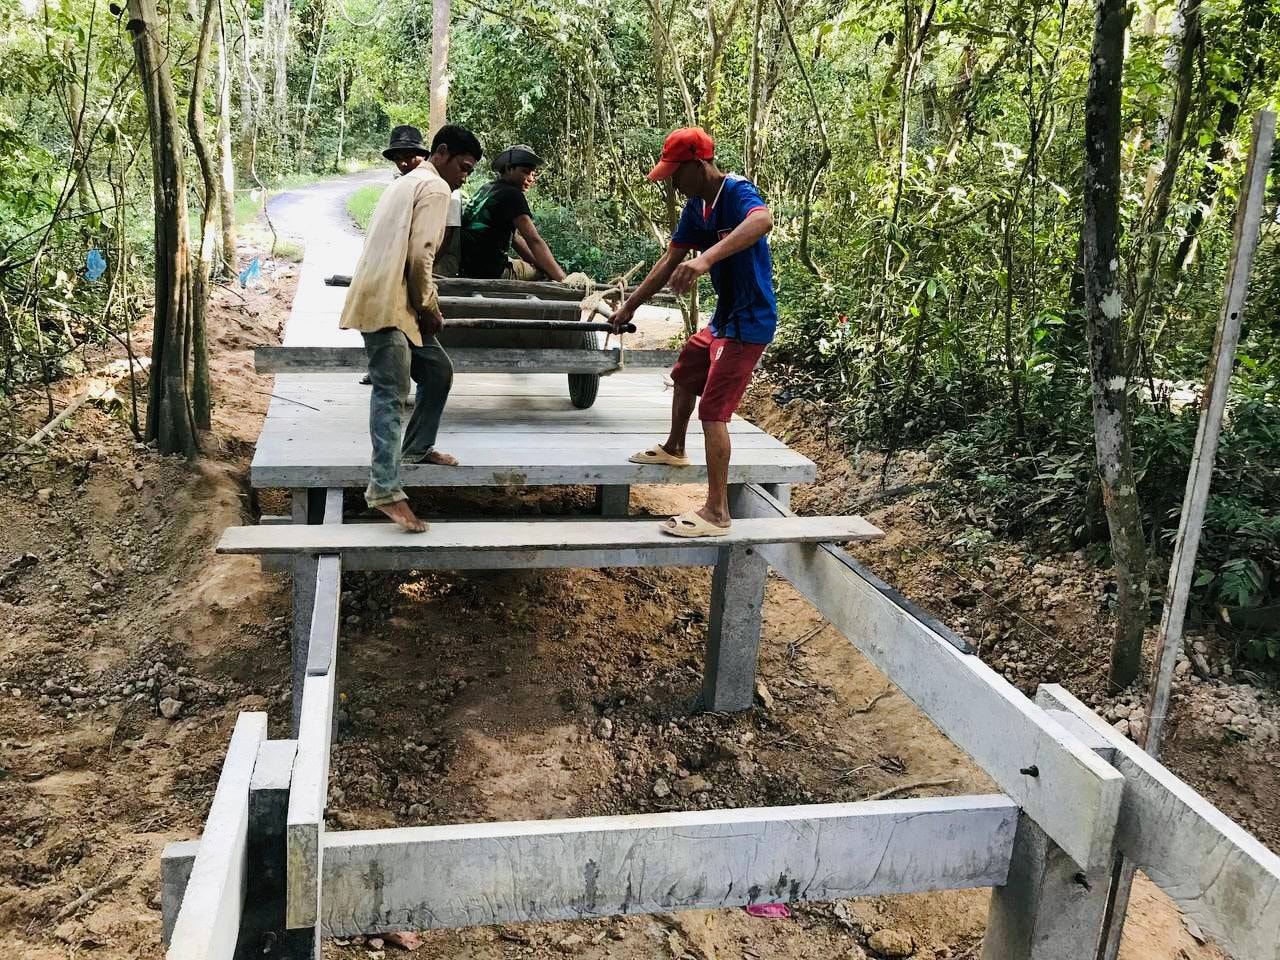 APSARA National Authority constructs two bridges for cycling route in the Angkor site